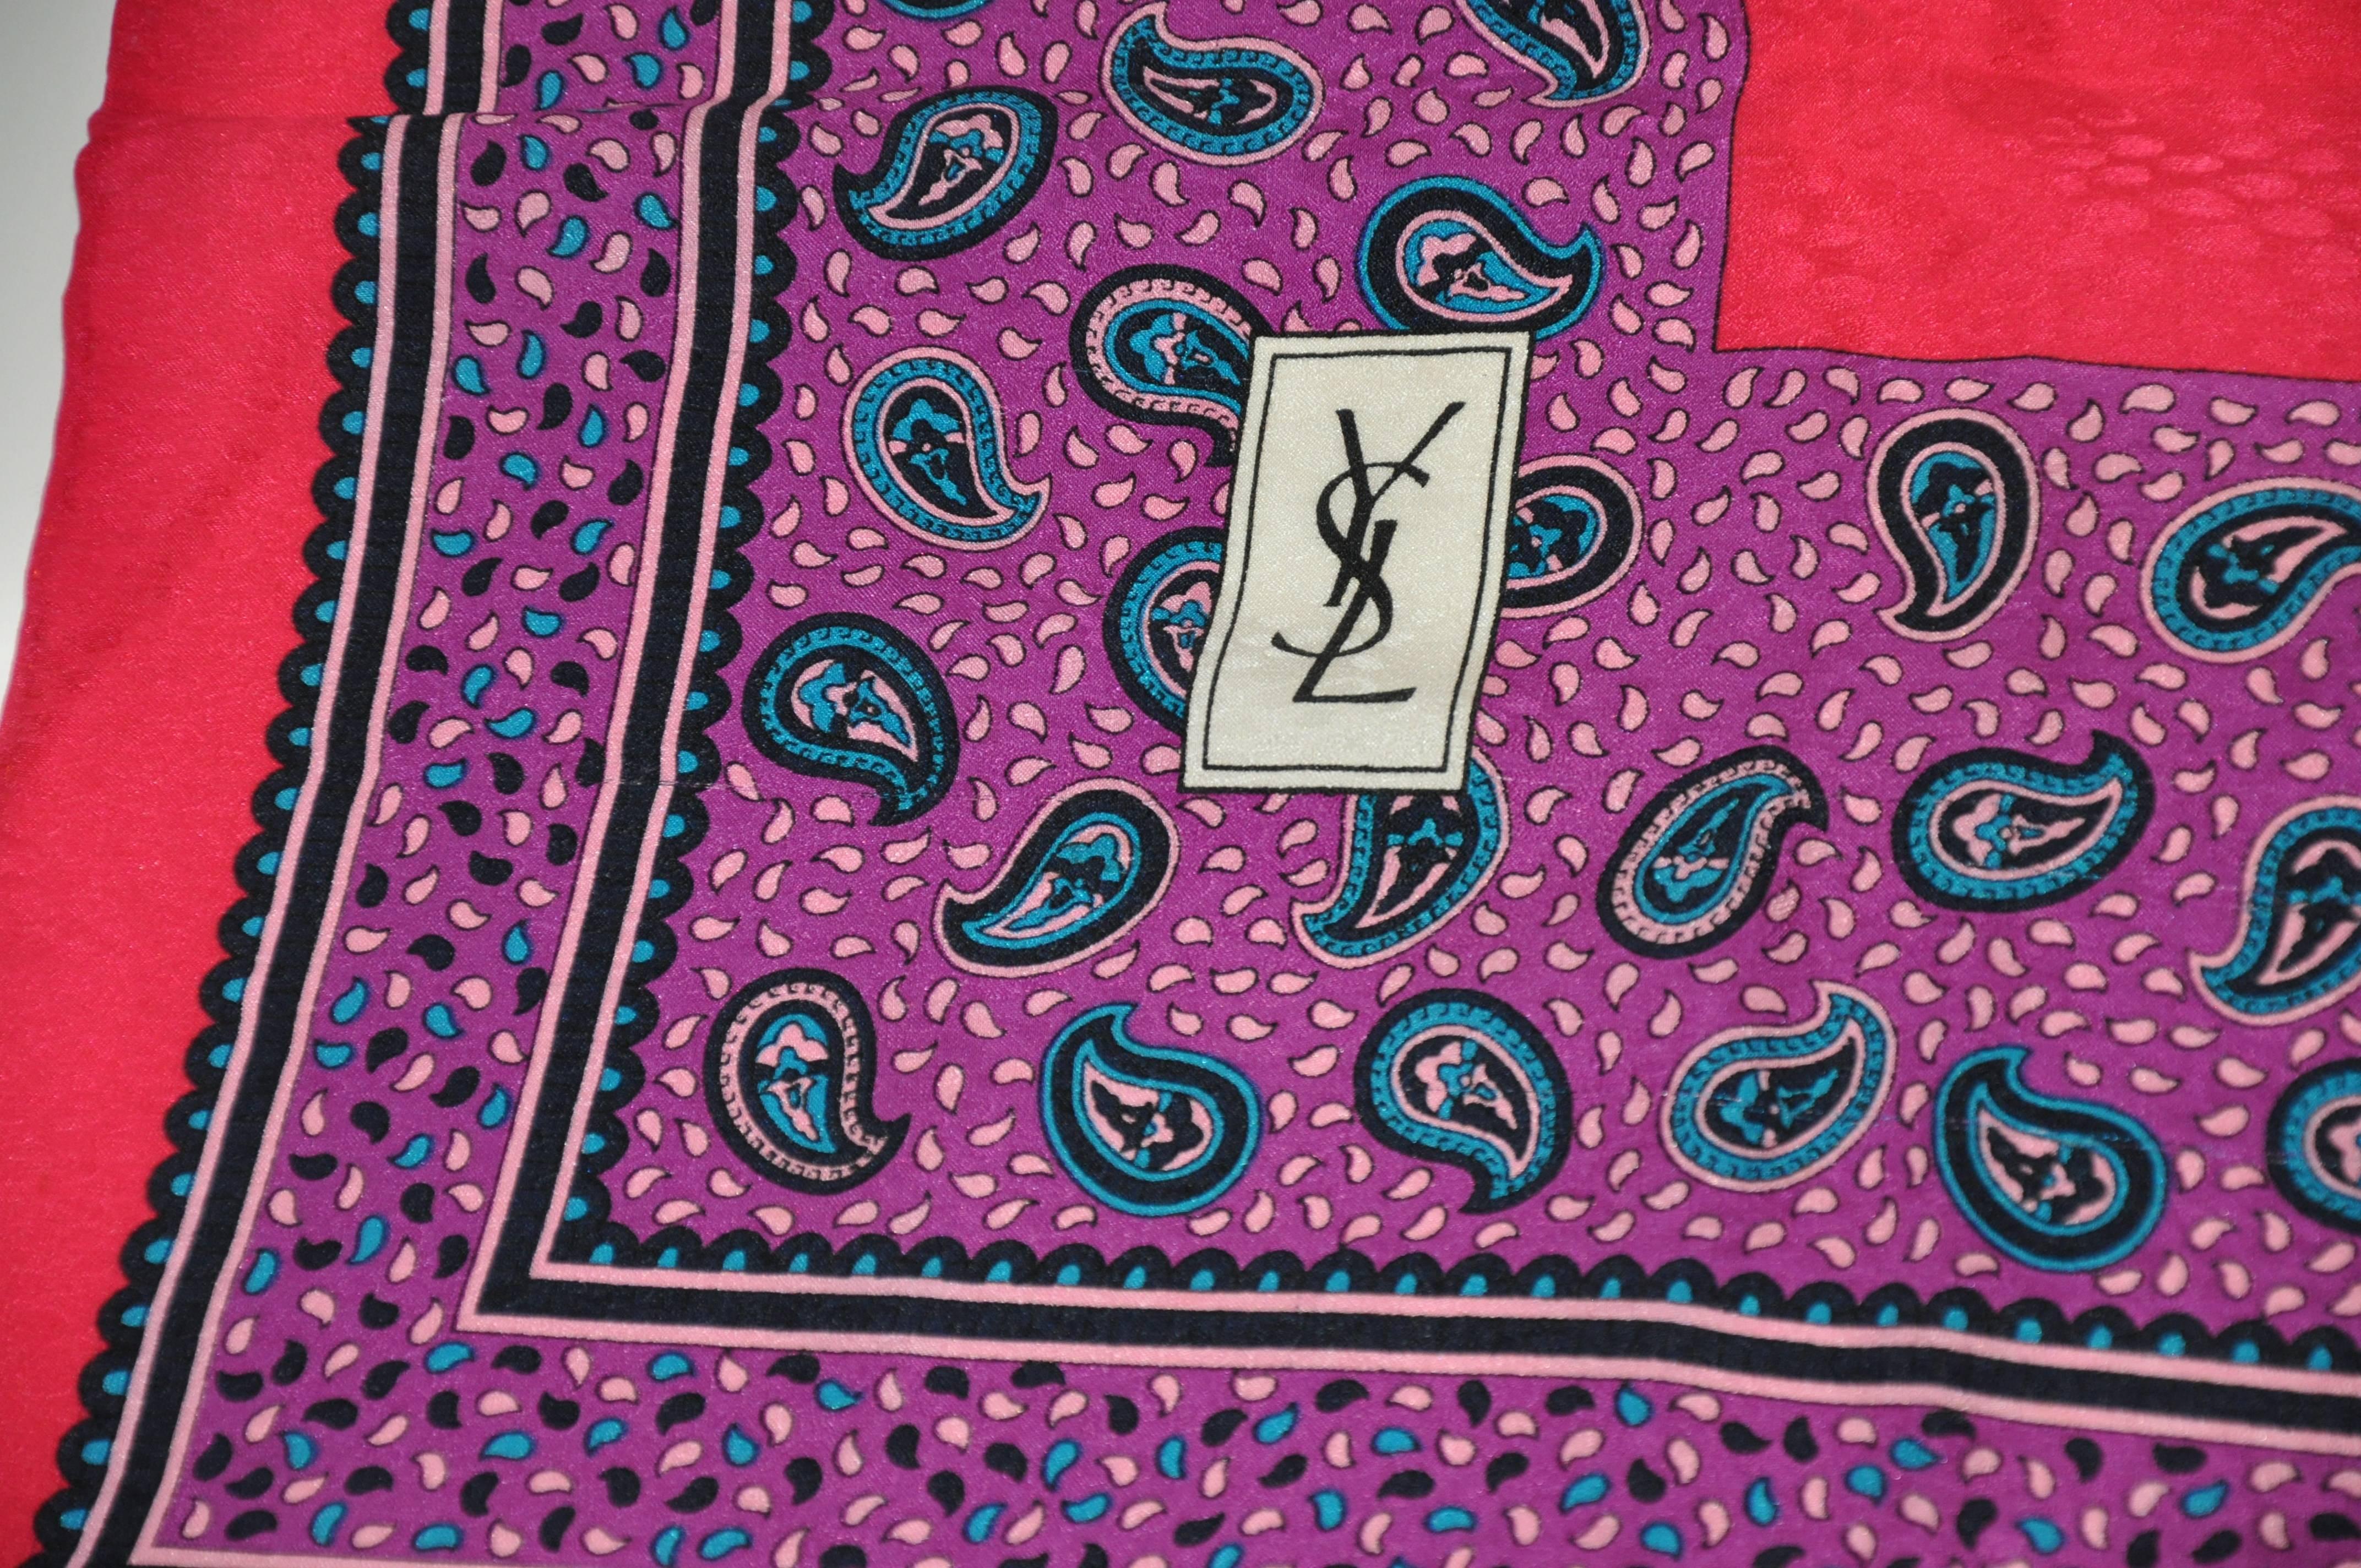        Yves Saint Laurent wonderful silk crepe di chine in colors of fuchsia, purple, black and cream is accented with borders of palsey print and finished with hand-rolled edges. This wonderfully elegant scarf measures 35